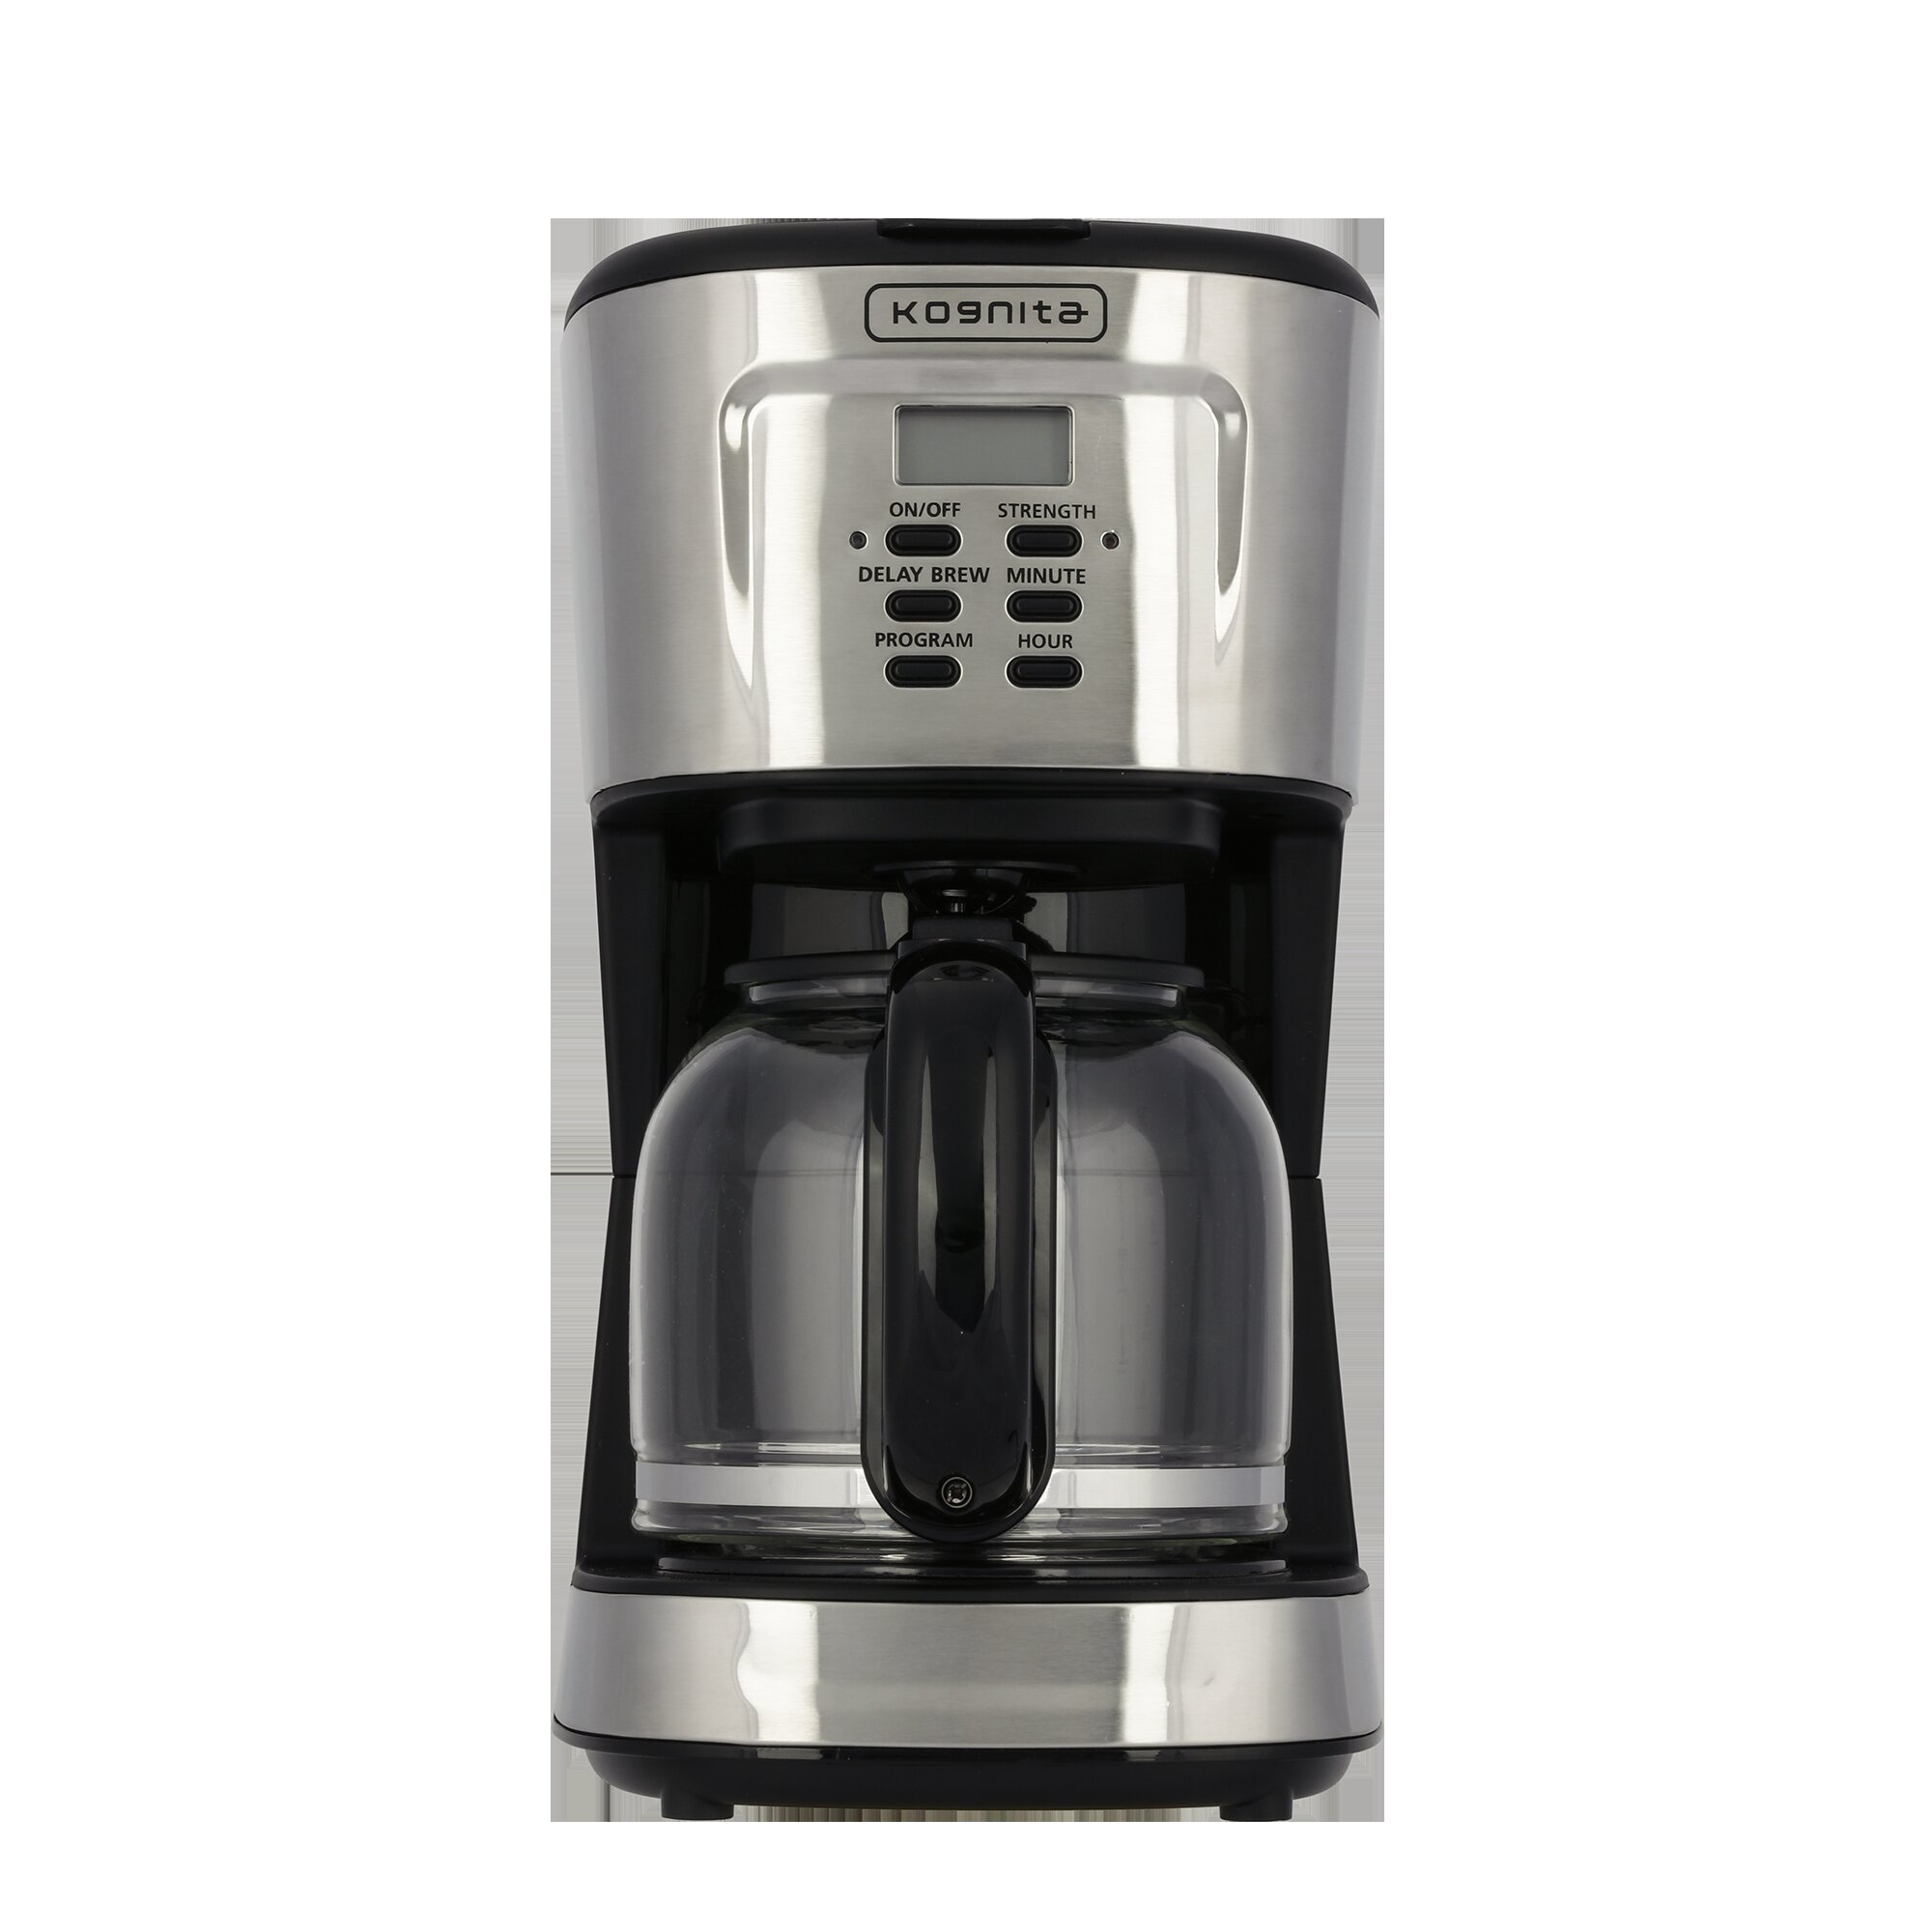  12 Cup Coffee Maker,Programmable Coffee Maker with Glass Carafe,900W  Quick Brew Drip Coffee Pot,Auto Keep Warm,Anti-Drip,Brew Strength Control,  Stainless Steel Coffe Machine for Home and Office: Home & Kitchen